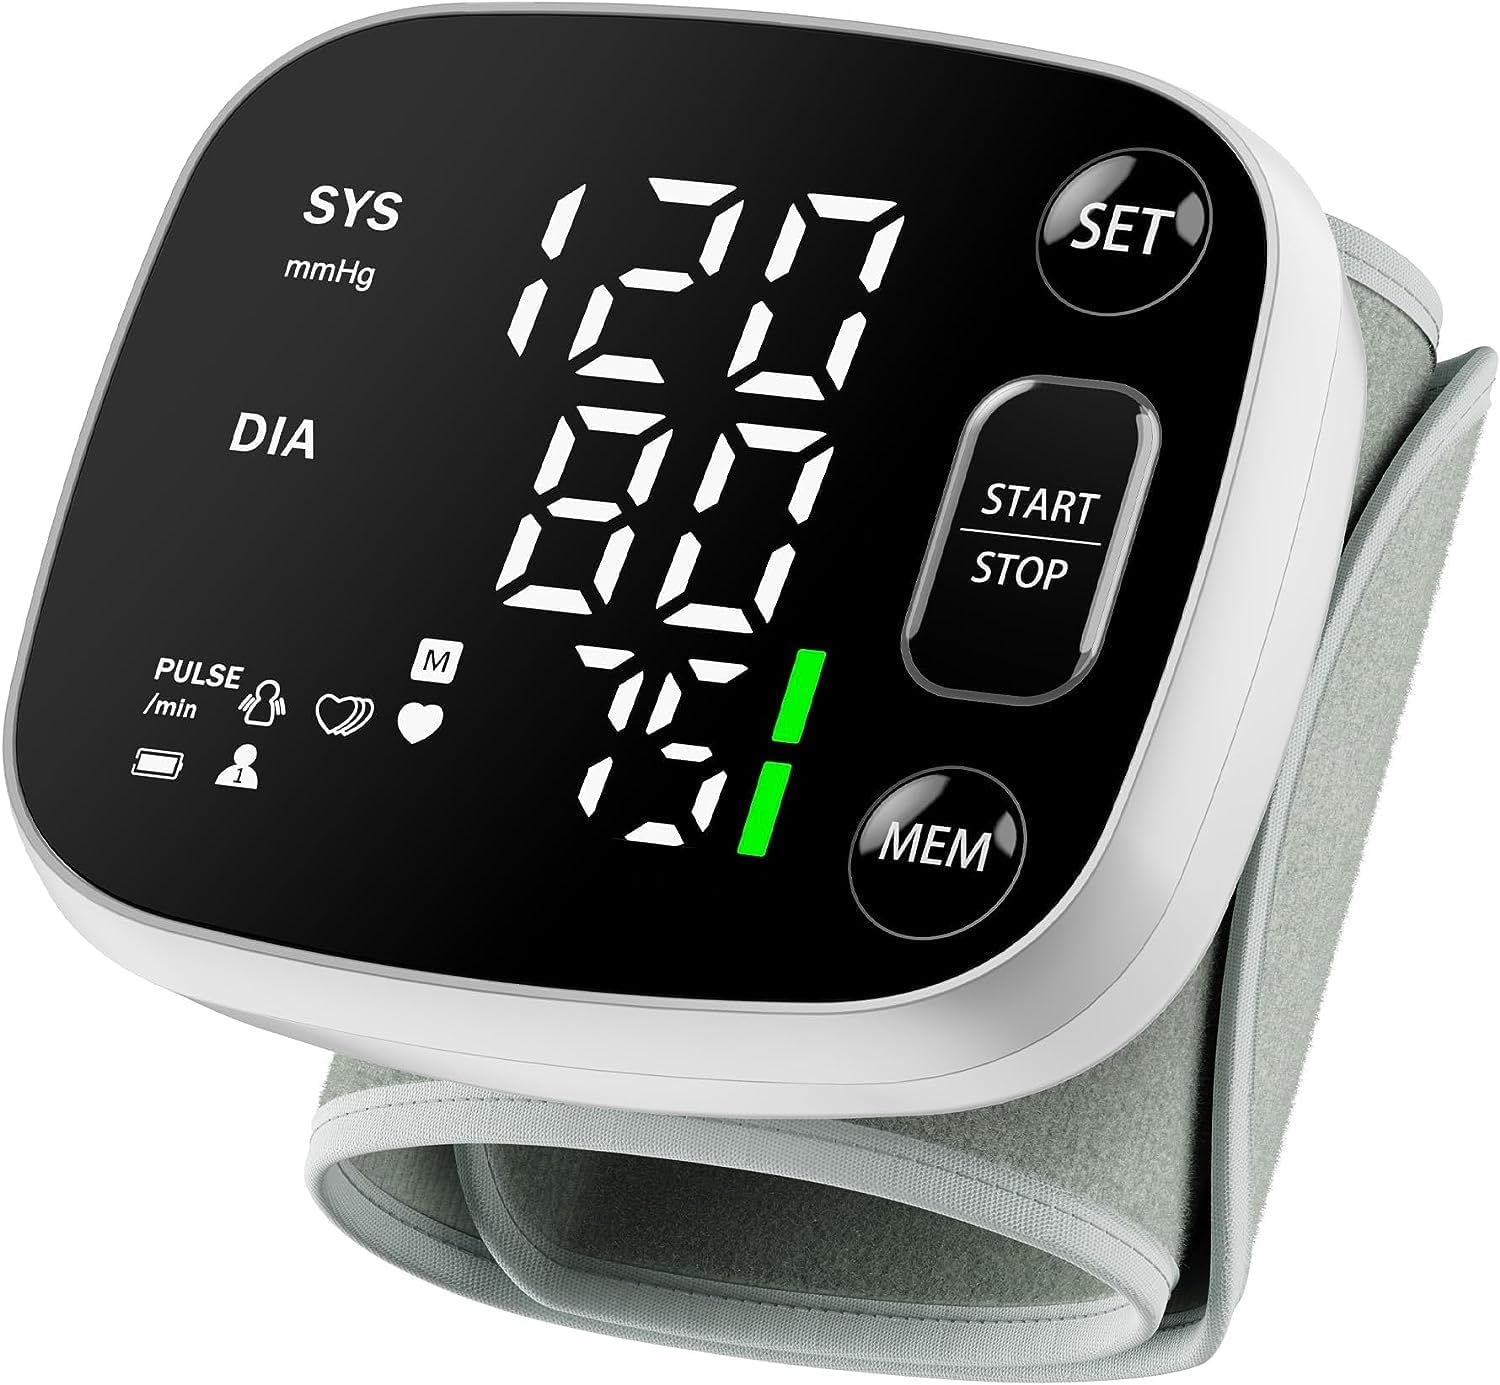 Get Your Exclusive Savings on Oklar Blood Pressure Monitors! Limited-Time Promo!